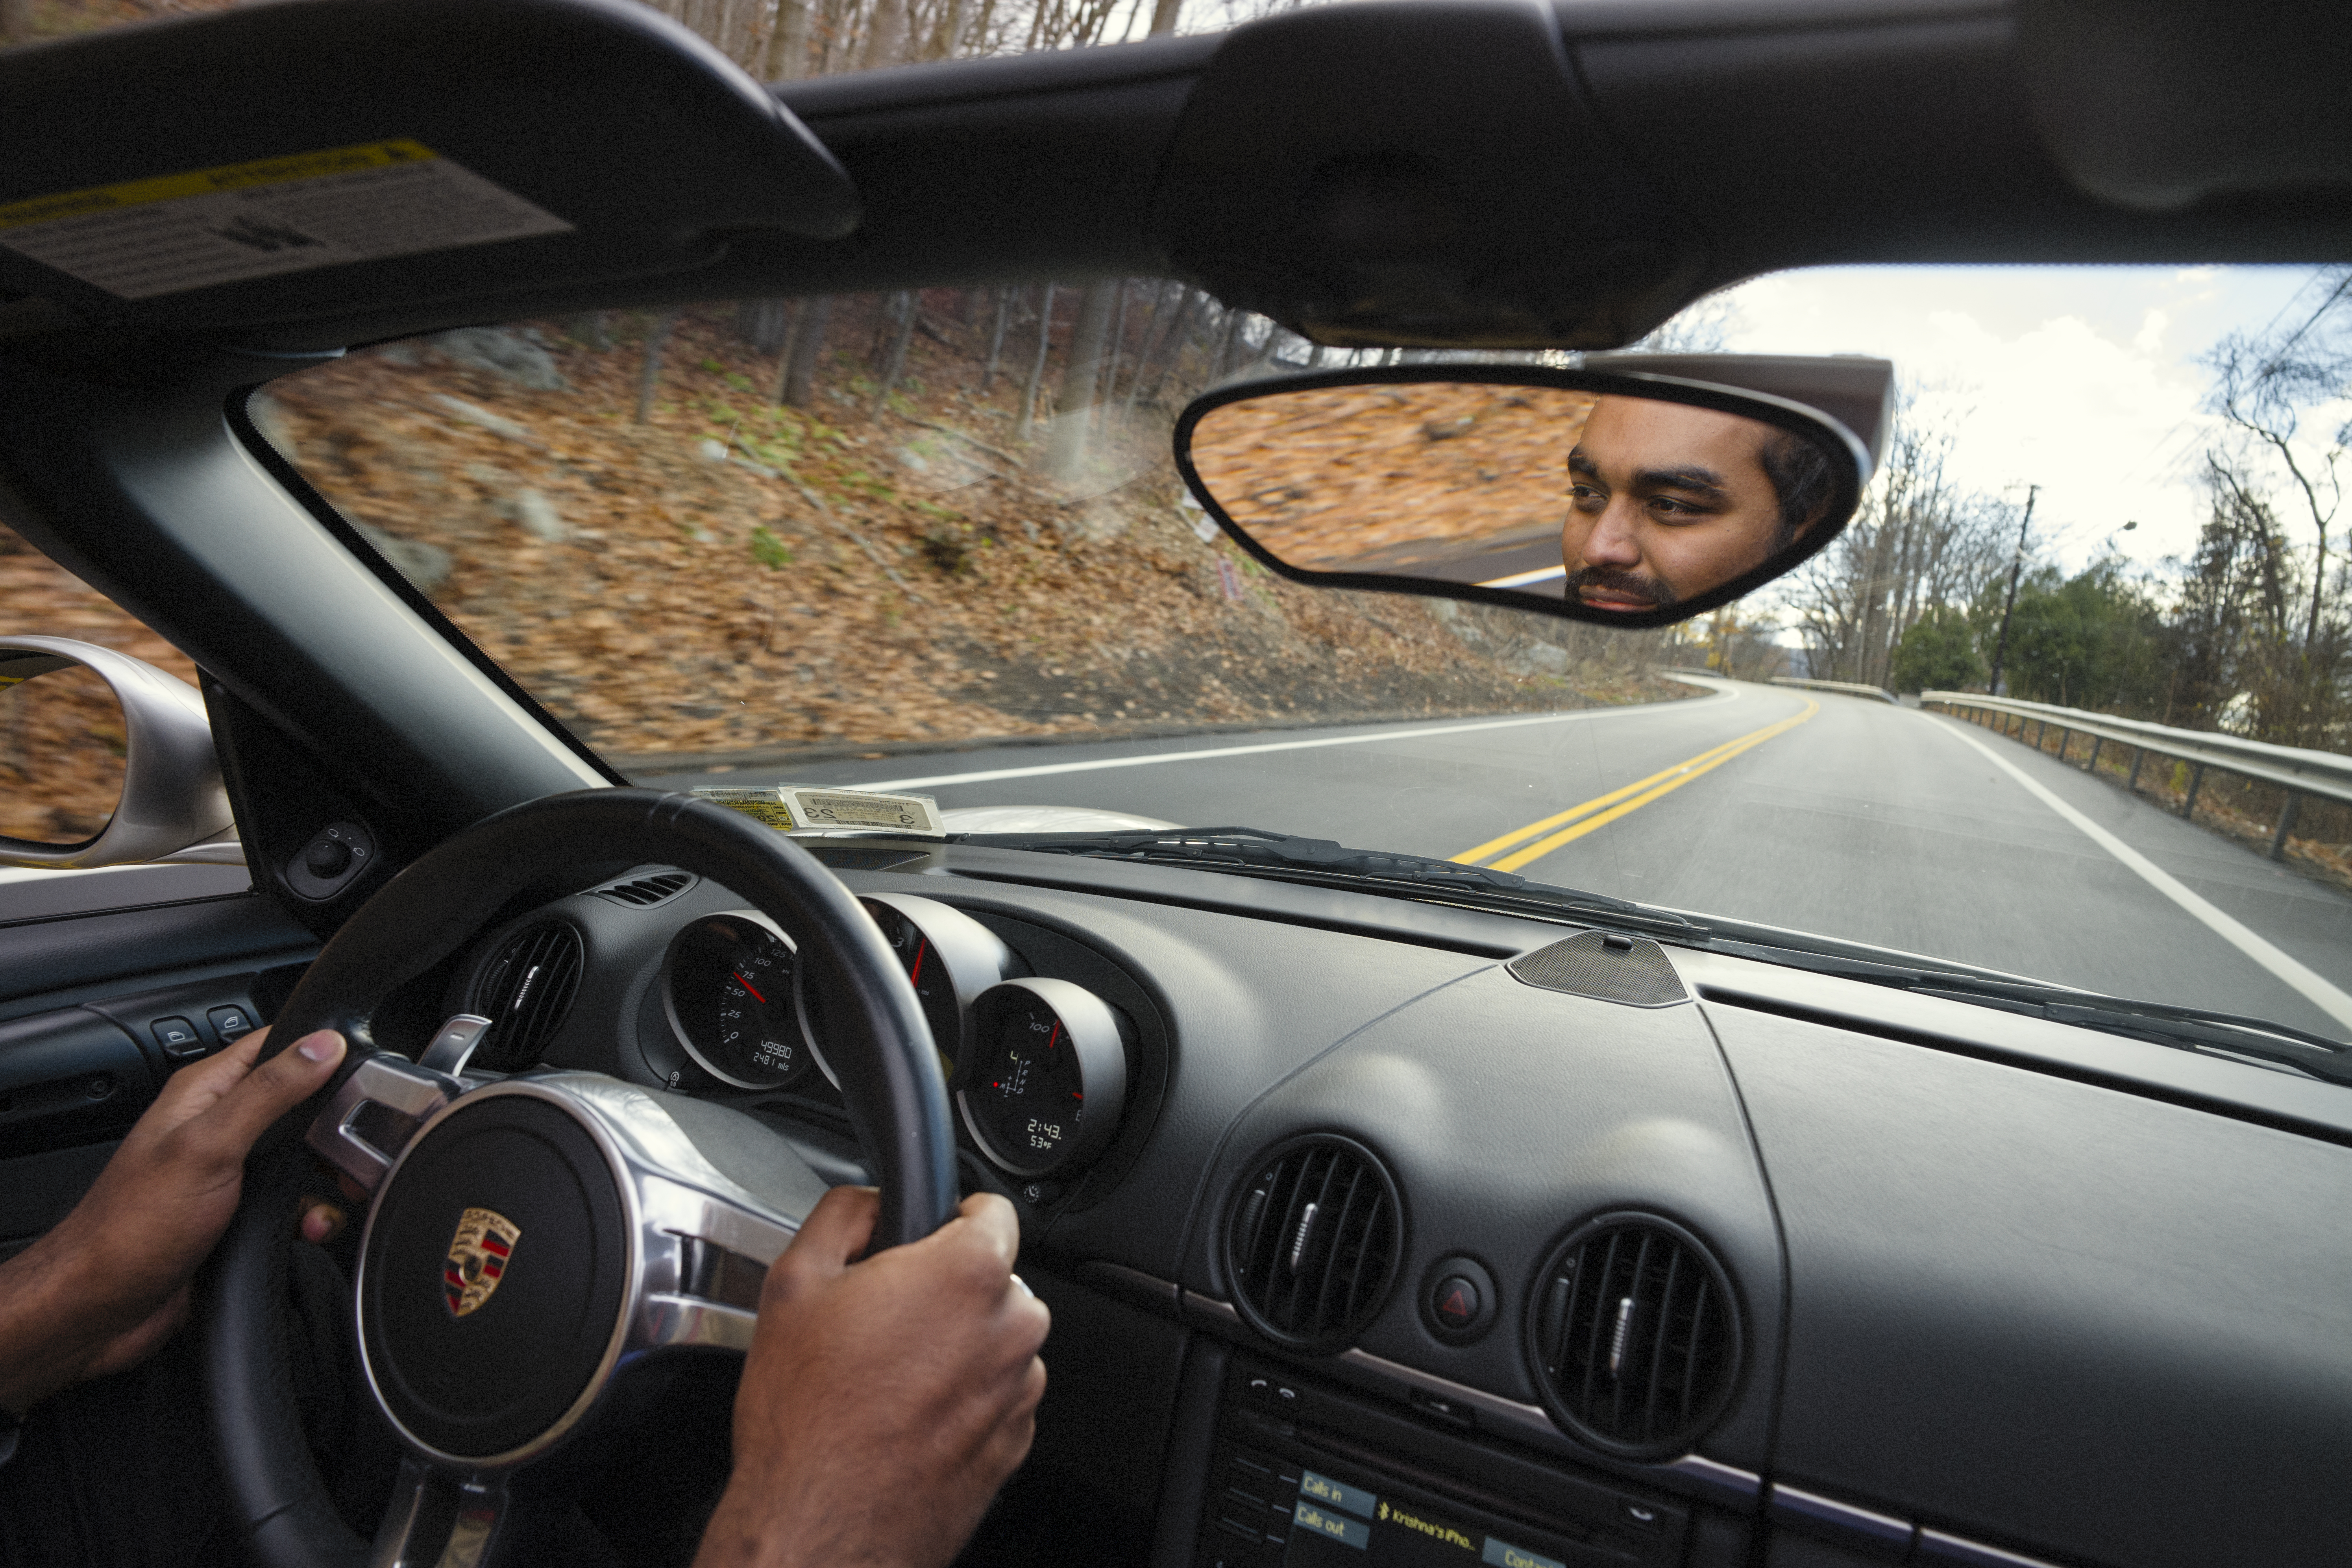 View from inside the car of man driving Porsche Boxster Spyder